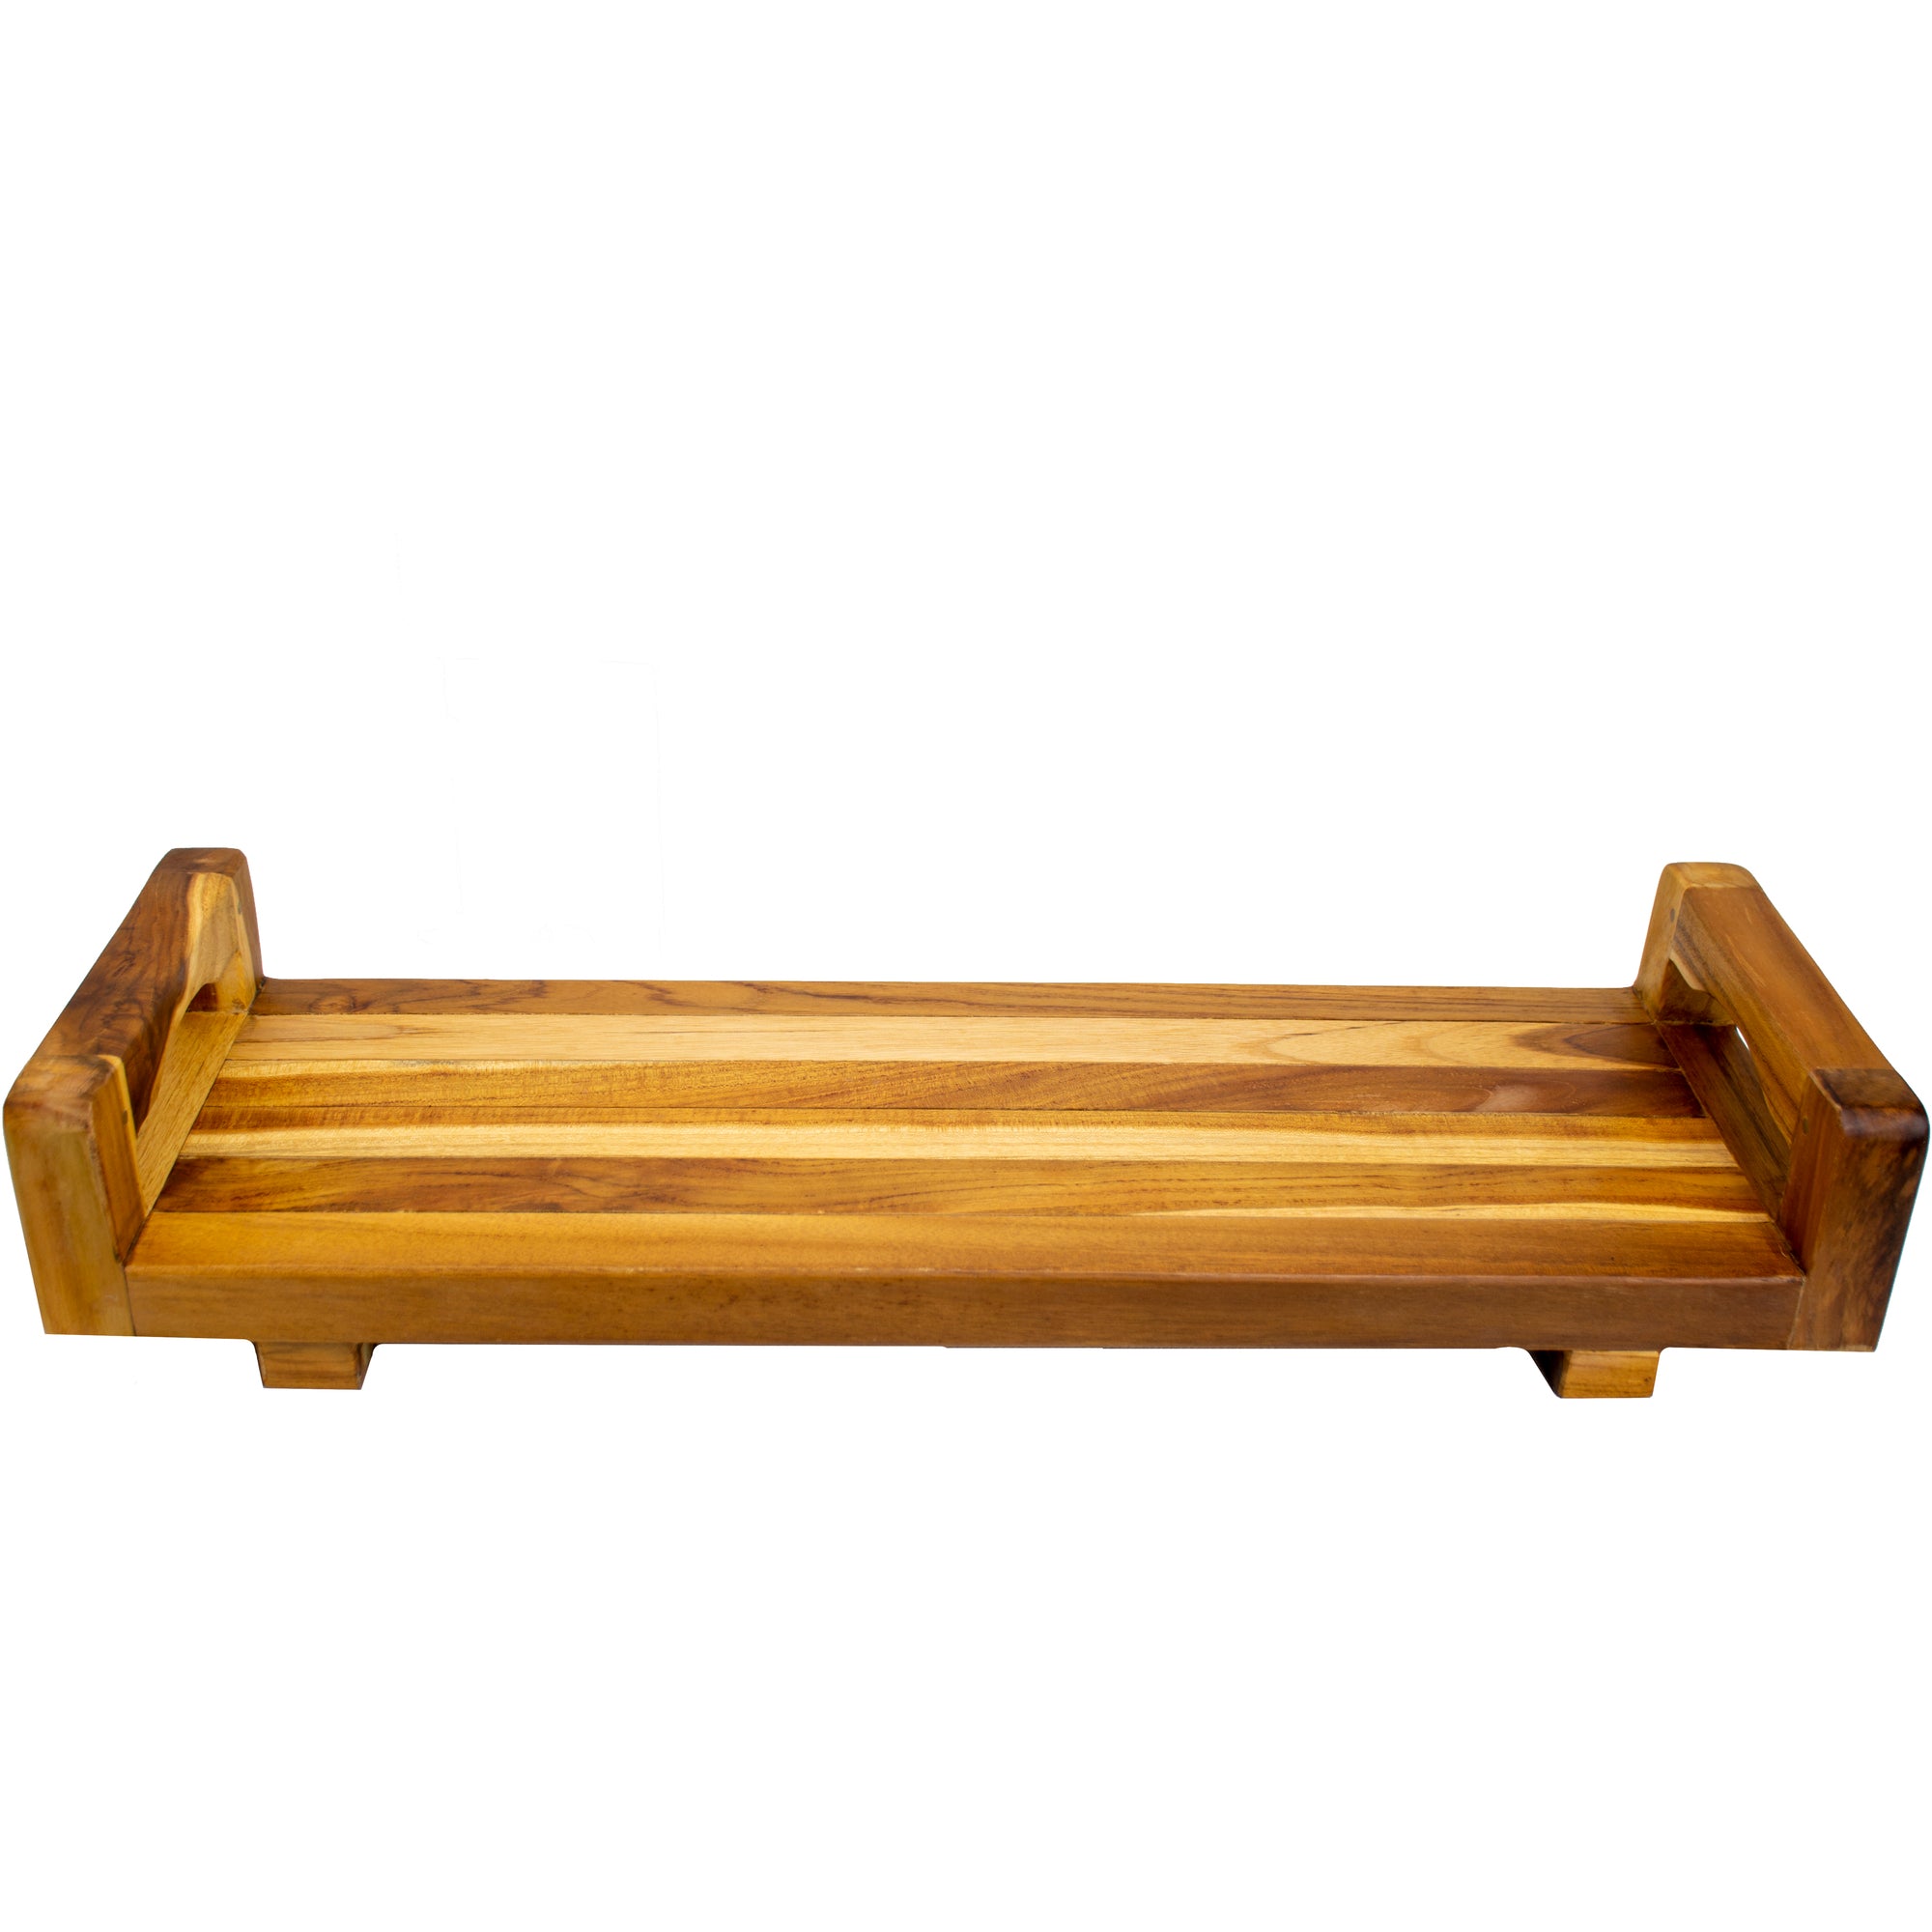 EcoDecors® Eleganto® 29" Teak Wood Bath Tray and Seat with LiftAide® Arms in EarthyTeak Finish - The EcoDecors Eleganto 23" x 15" Slatted Solid Teak Bath Floor Mat in EarthyTeak Finish